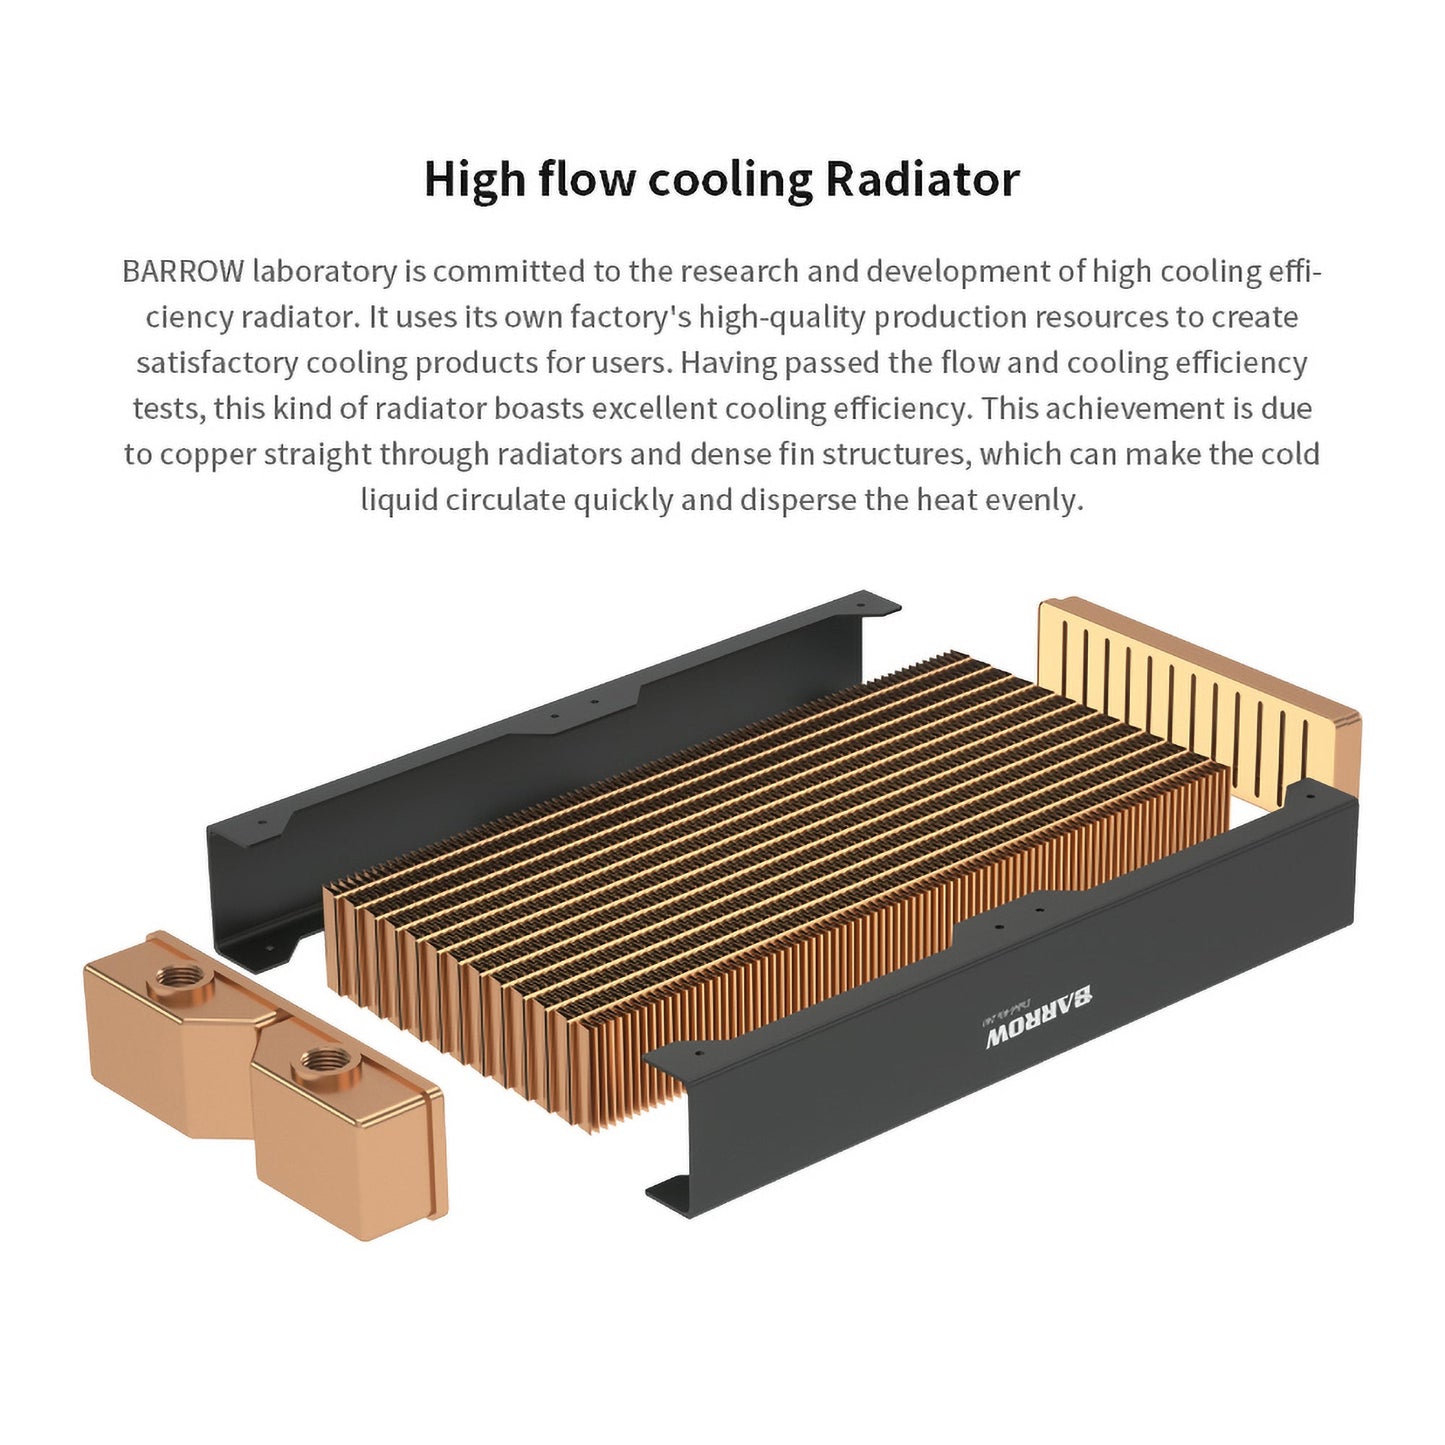 Barrow 120 Red Copper Radiator, Black/White 28mm Thickness G1/4" Thread High-density Revolving Heat Dissipation Passageway Radiator, For Water Cooling System, Dabel-28b 120 / Dabel-28a 120